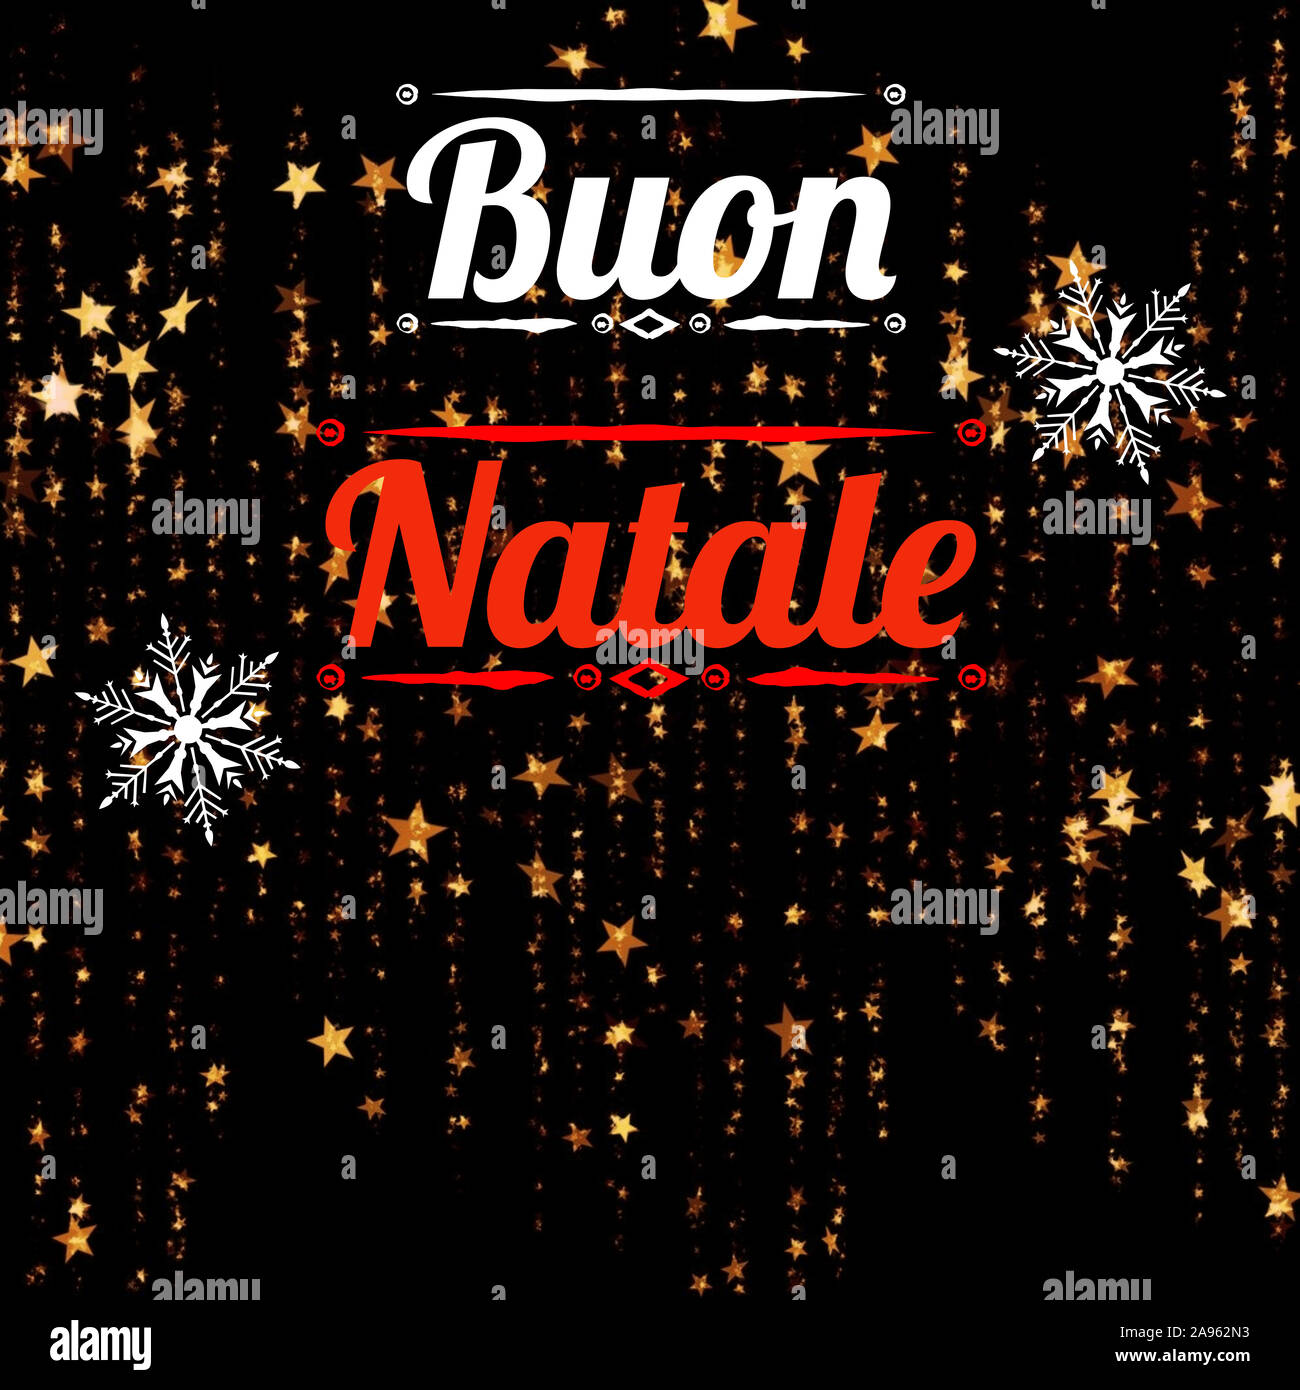 Wallpaper Buon Natale.Illustration With Buon Natale Written In Italian Language With Stars And Decorations Christmas Model For Web Wallpaper Digital Graphics Stock Photo Alamy